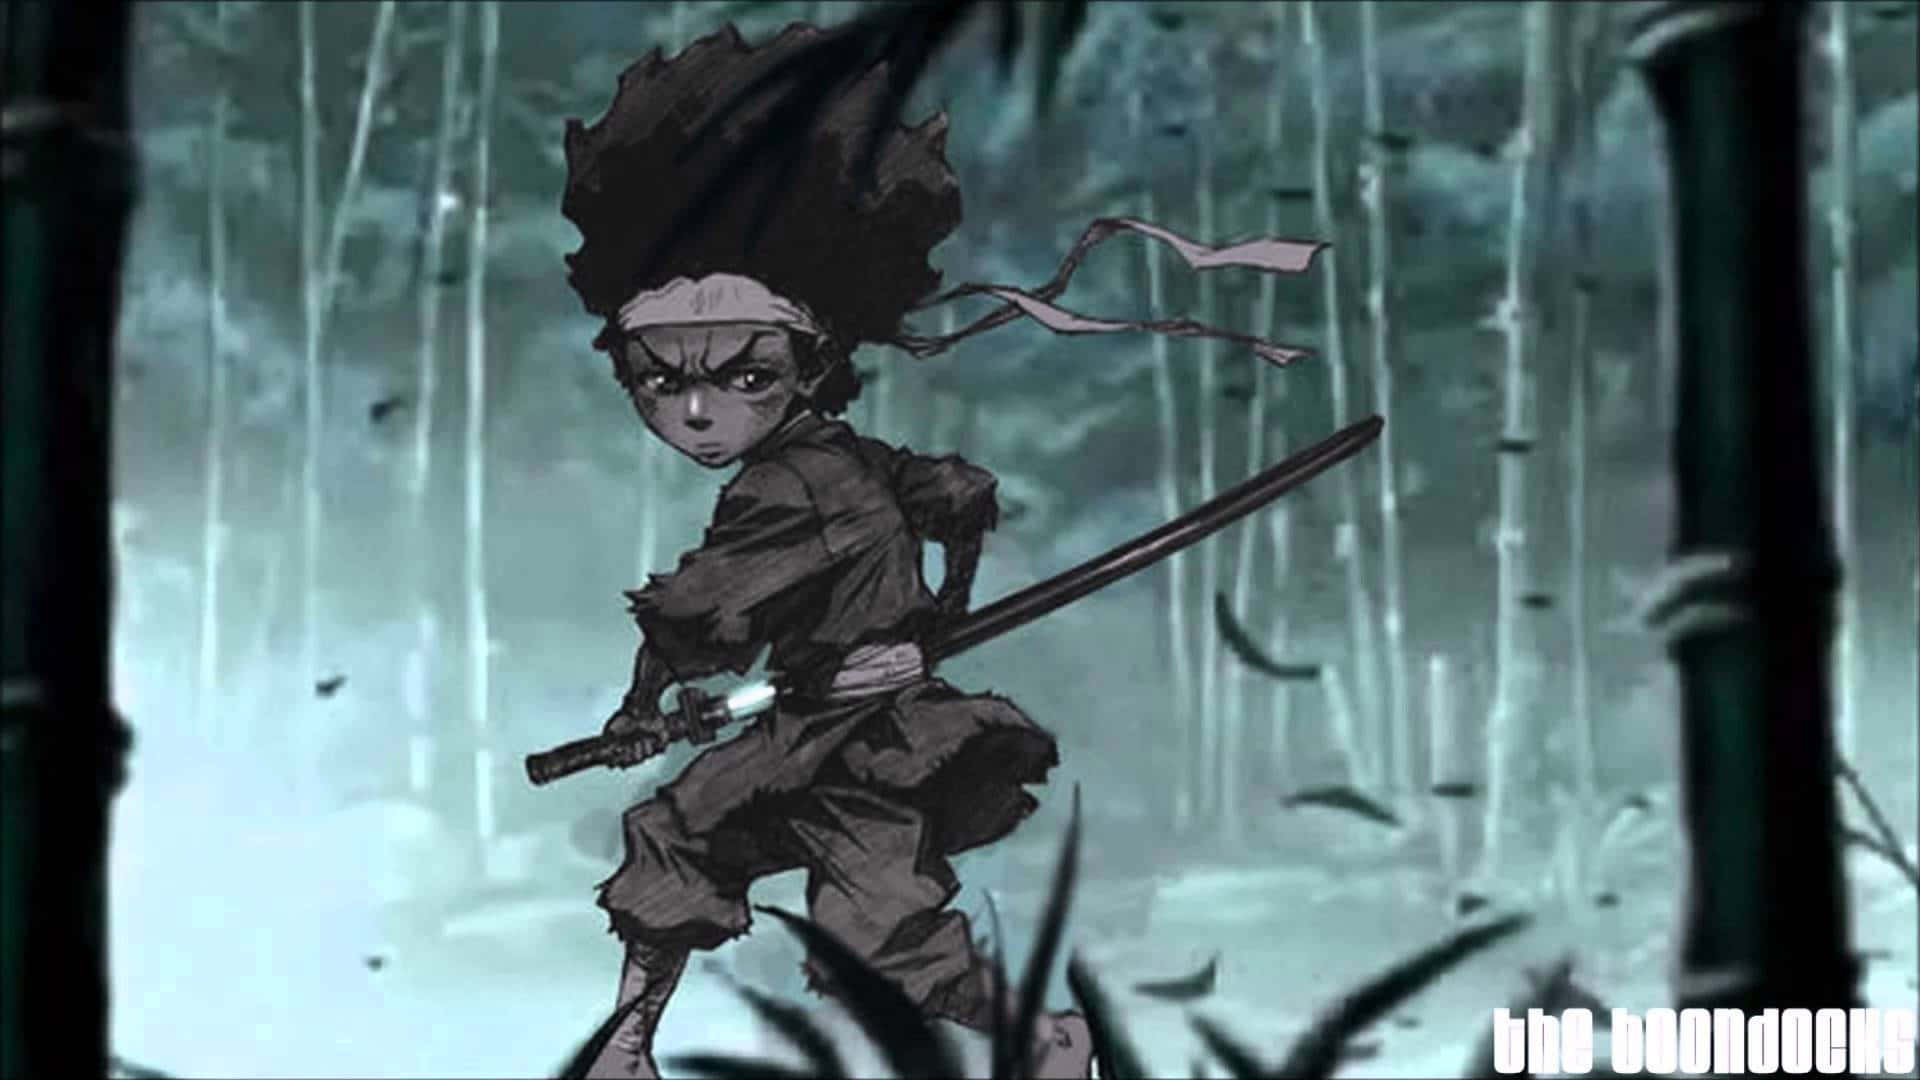 A Cartoon Character With A Sword In The Forest